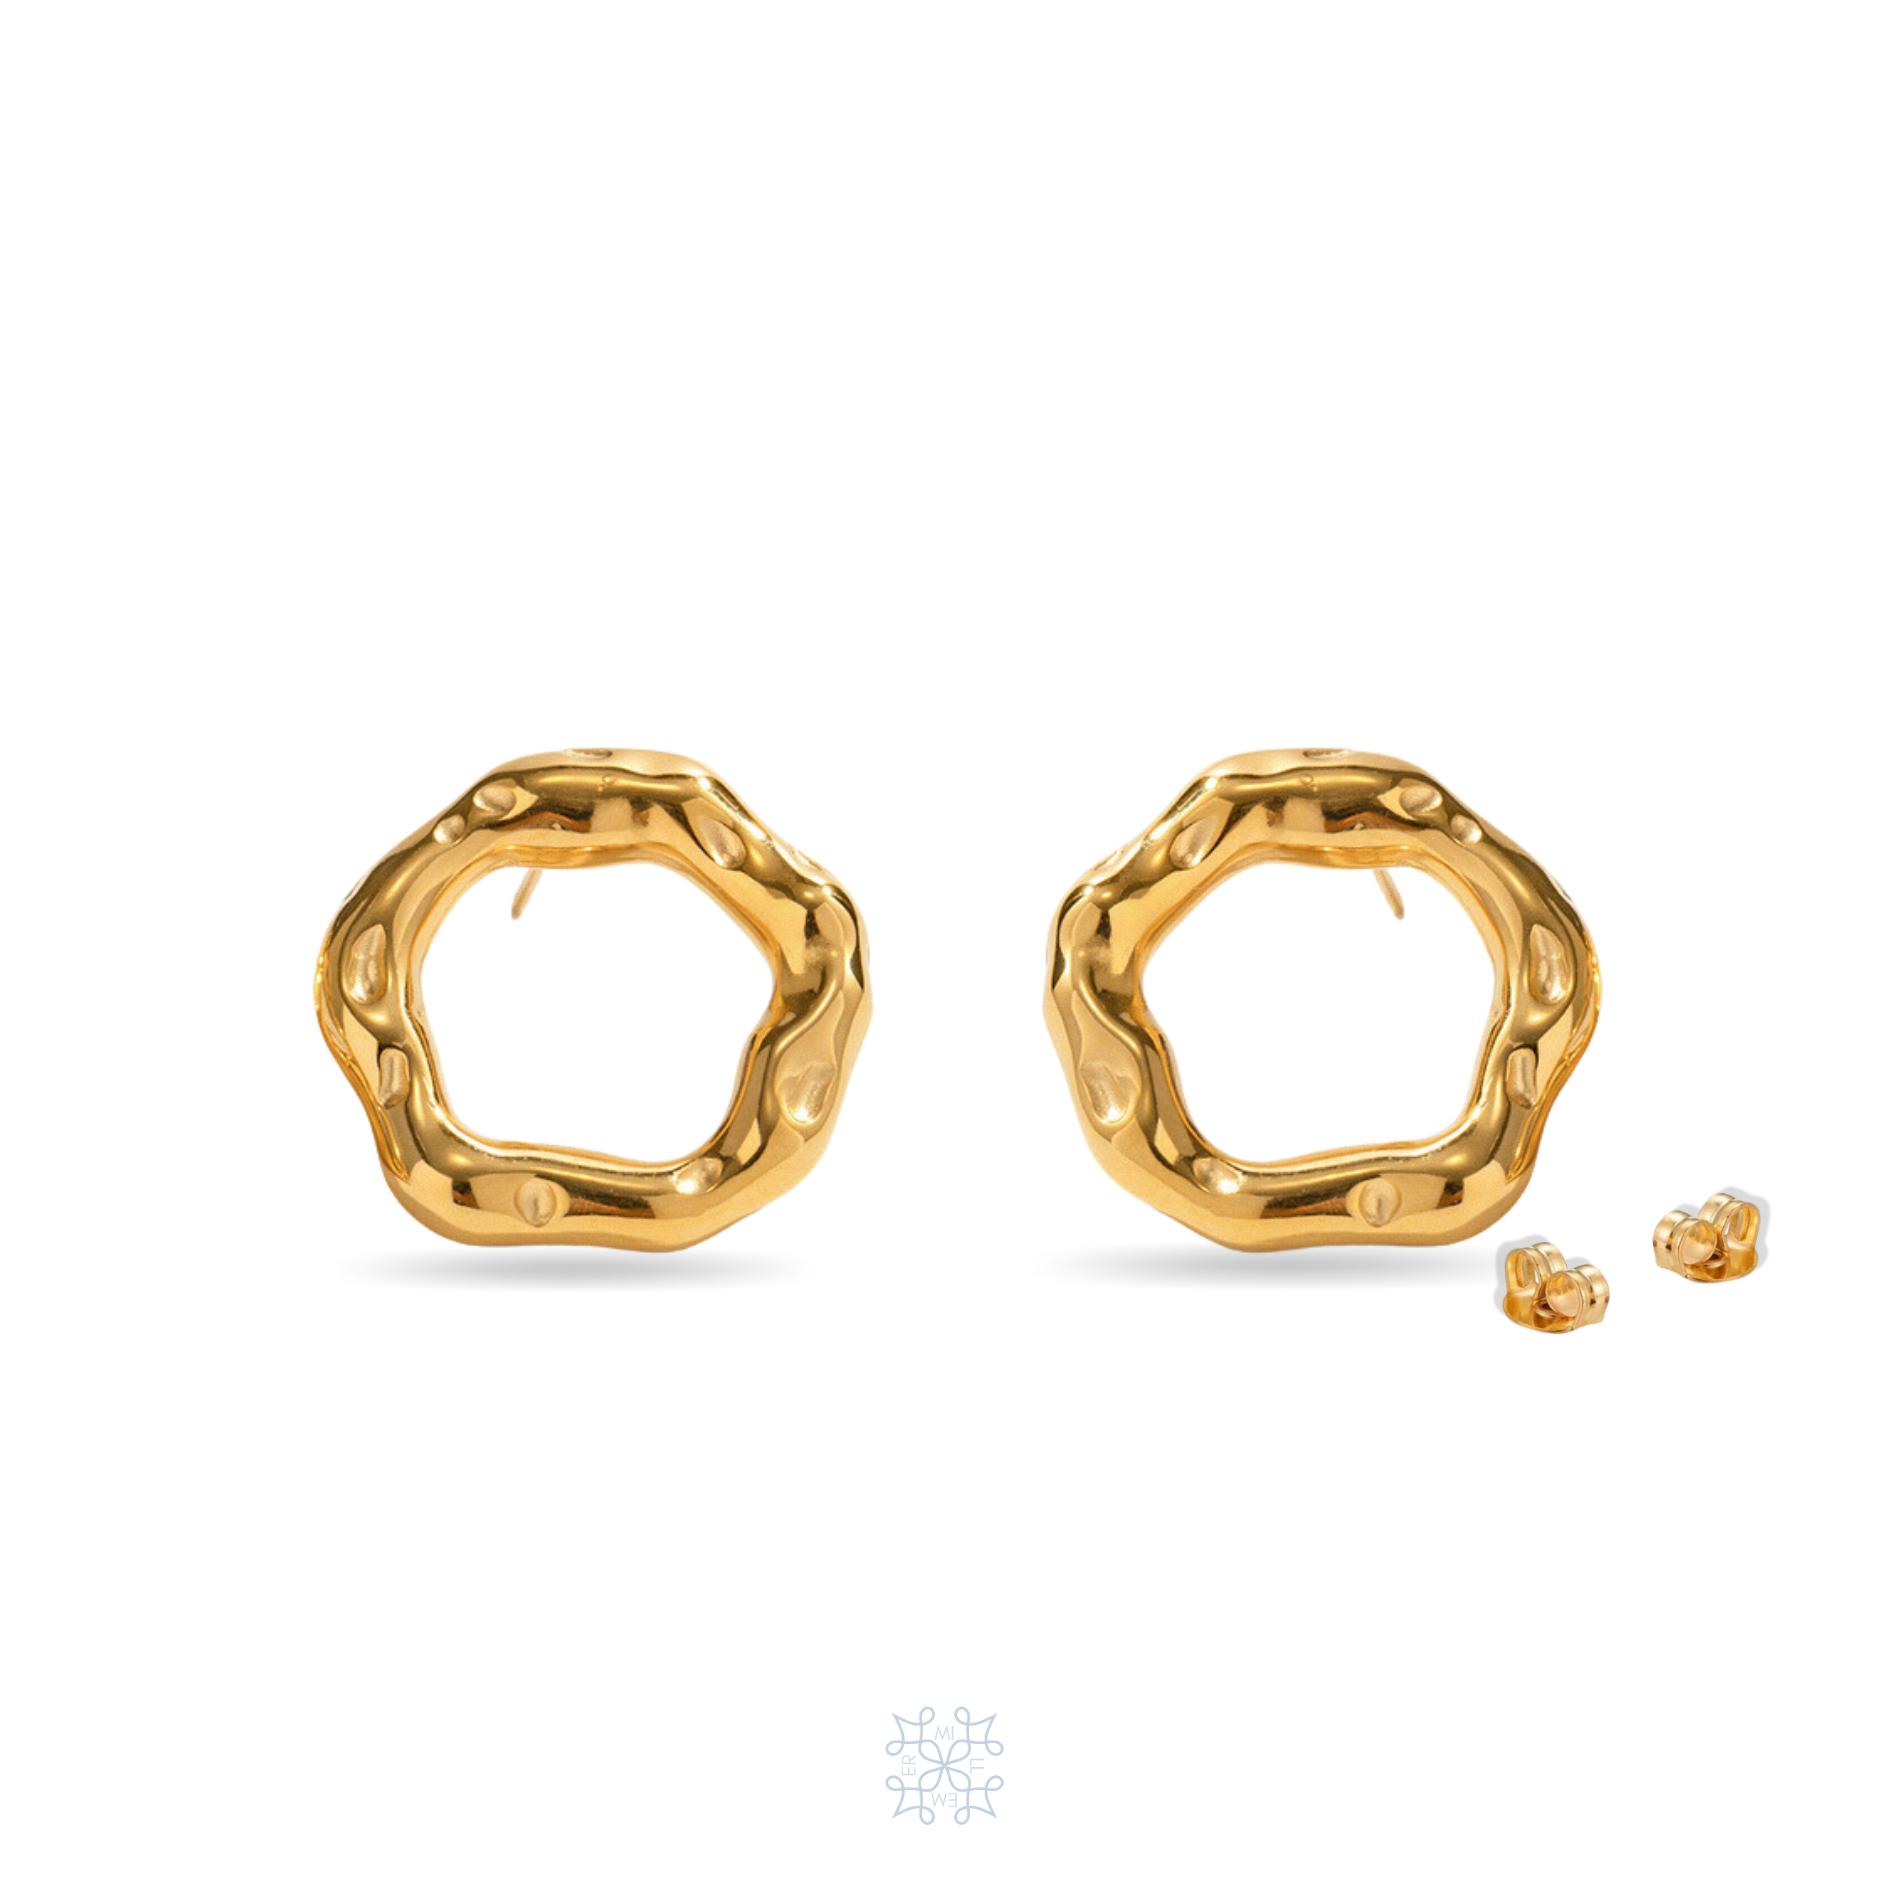 Circle Earrings with irregular shape. Gold plated with texture that imitates movement.